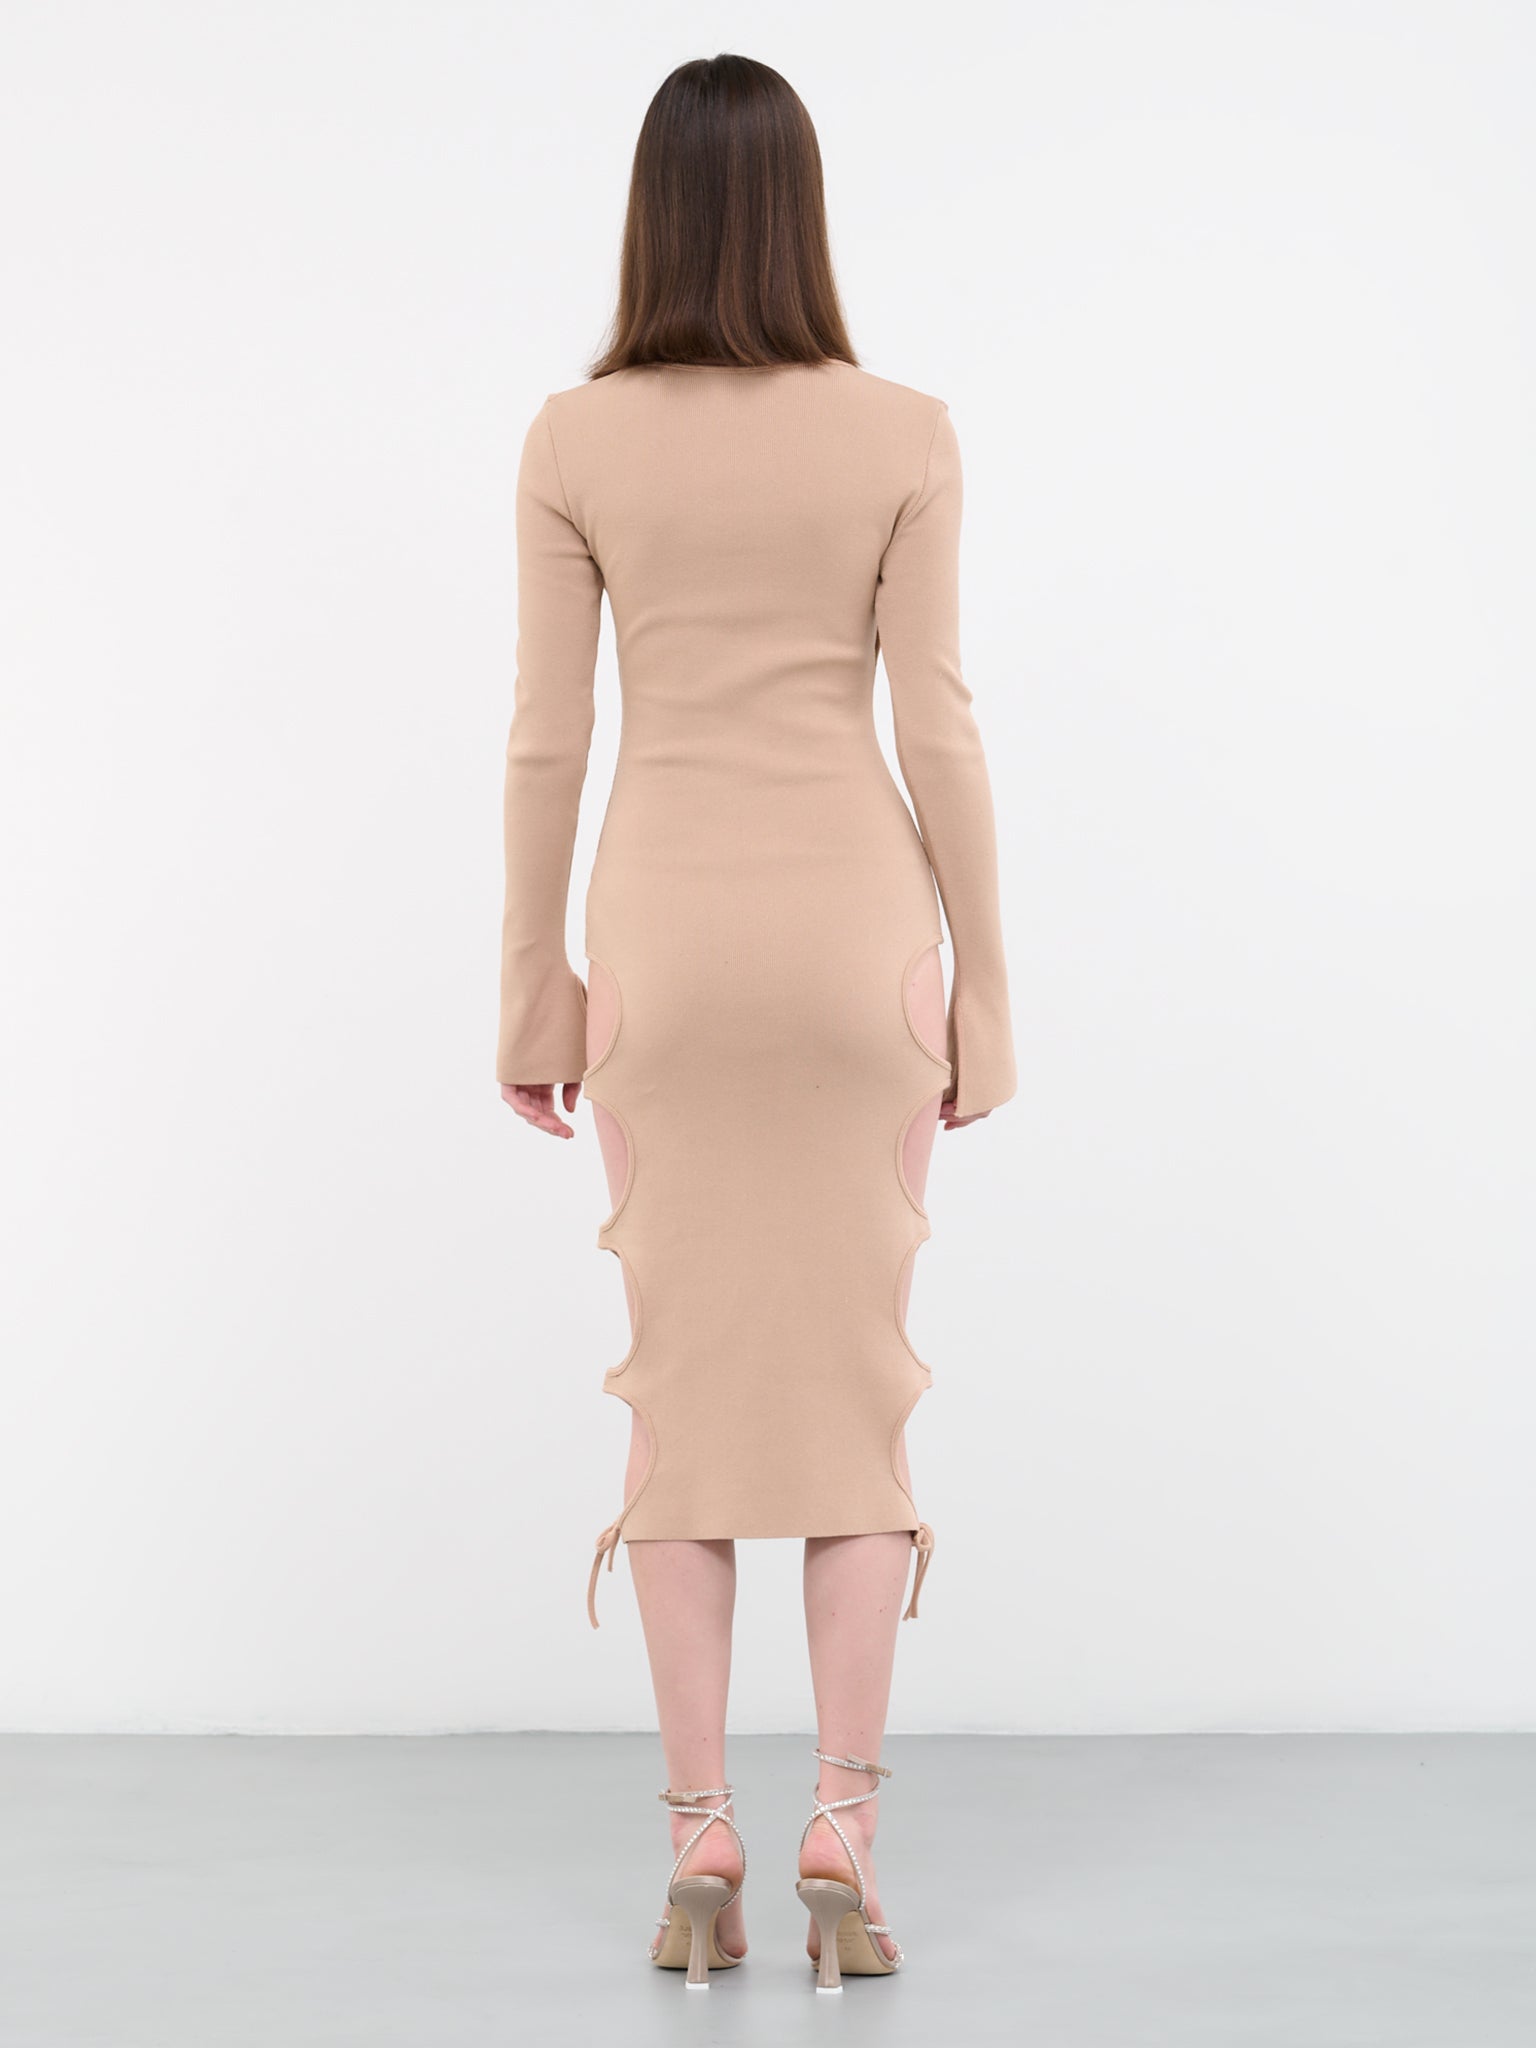 Cut-Out Knit Dress (DR21947268-0475-001-NUDE)